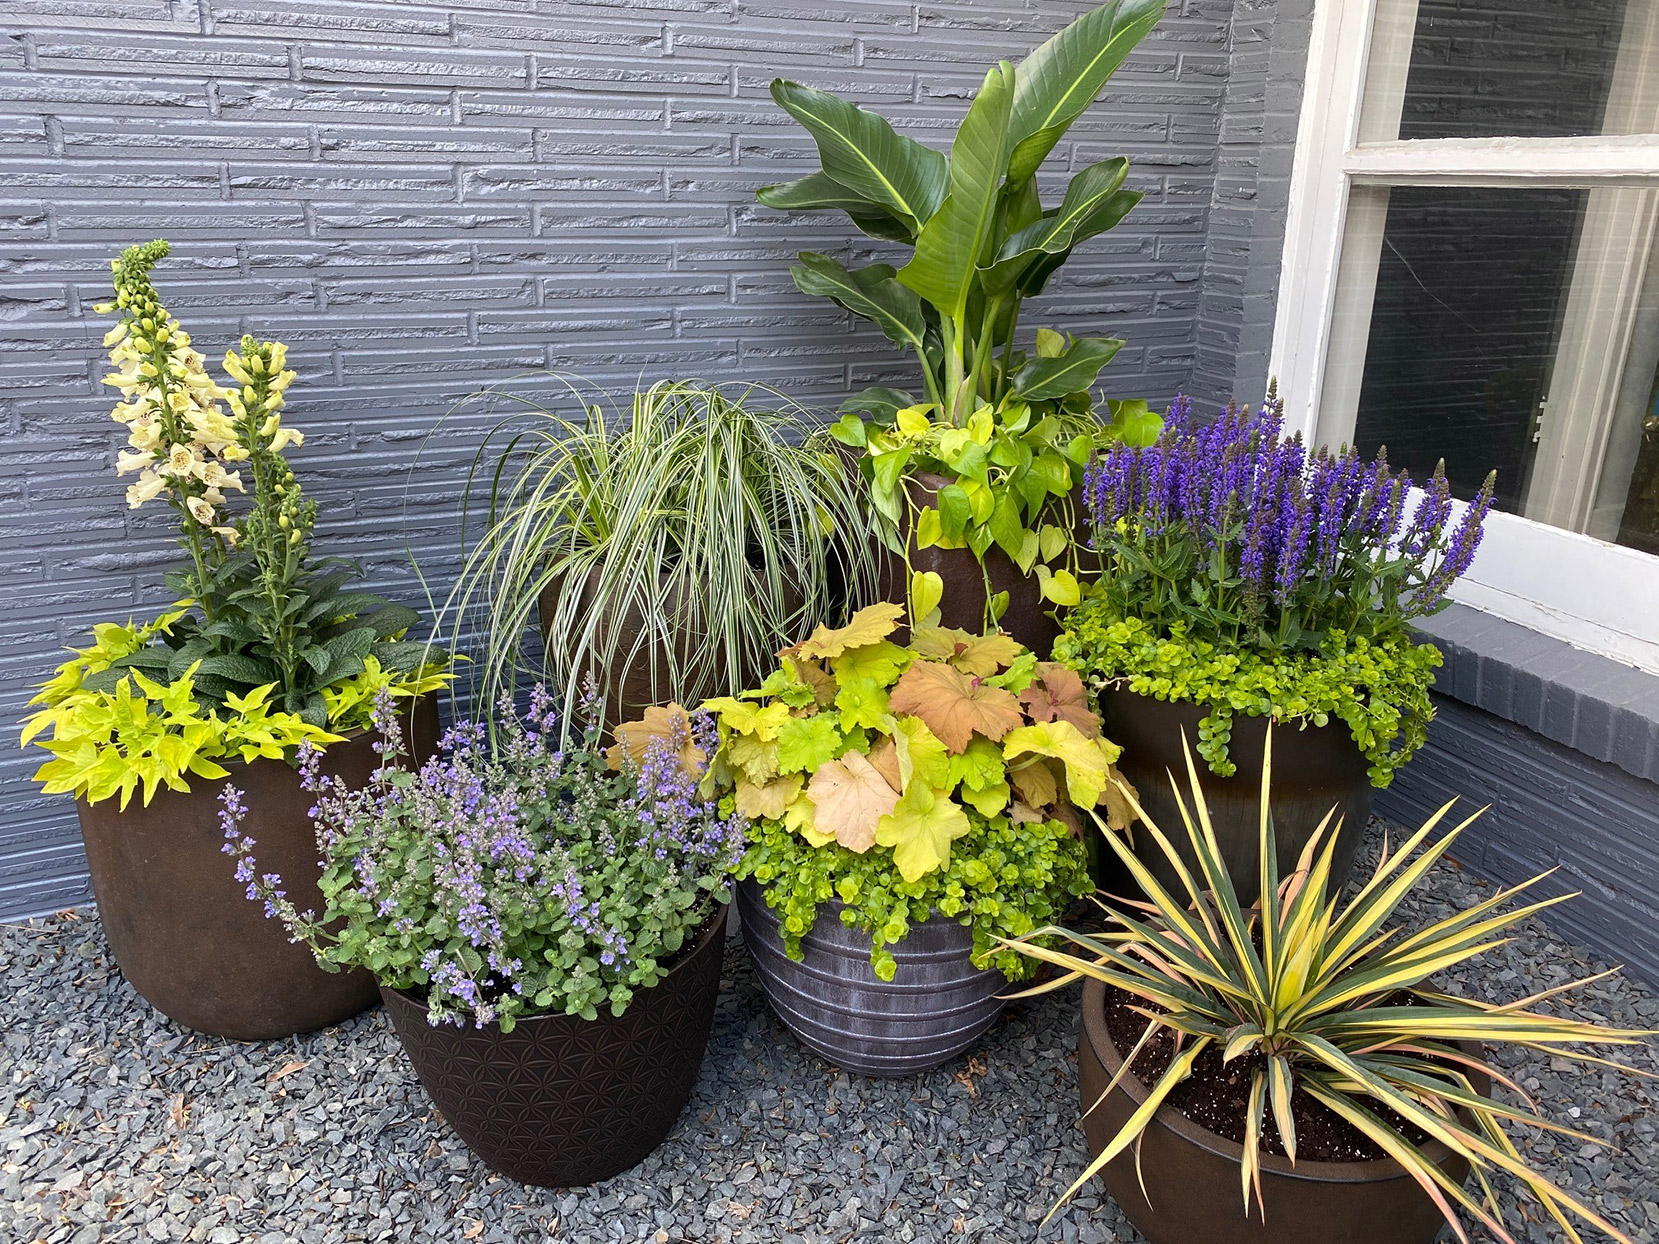 Top 9 Tips To Style Your Home With Bowl Planters